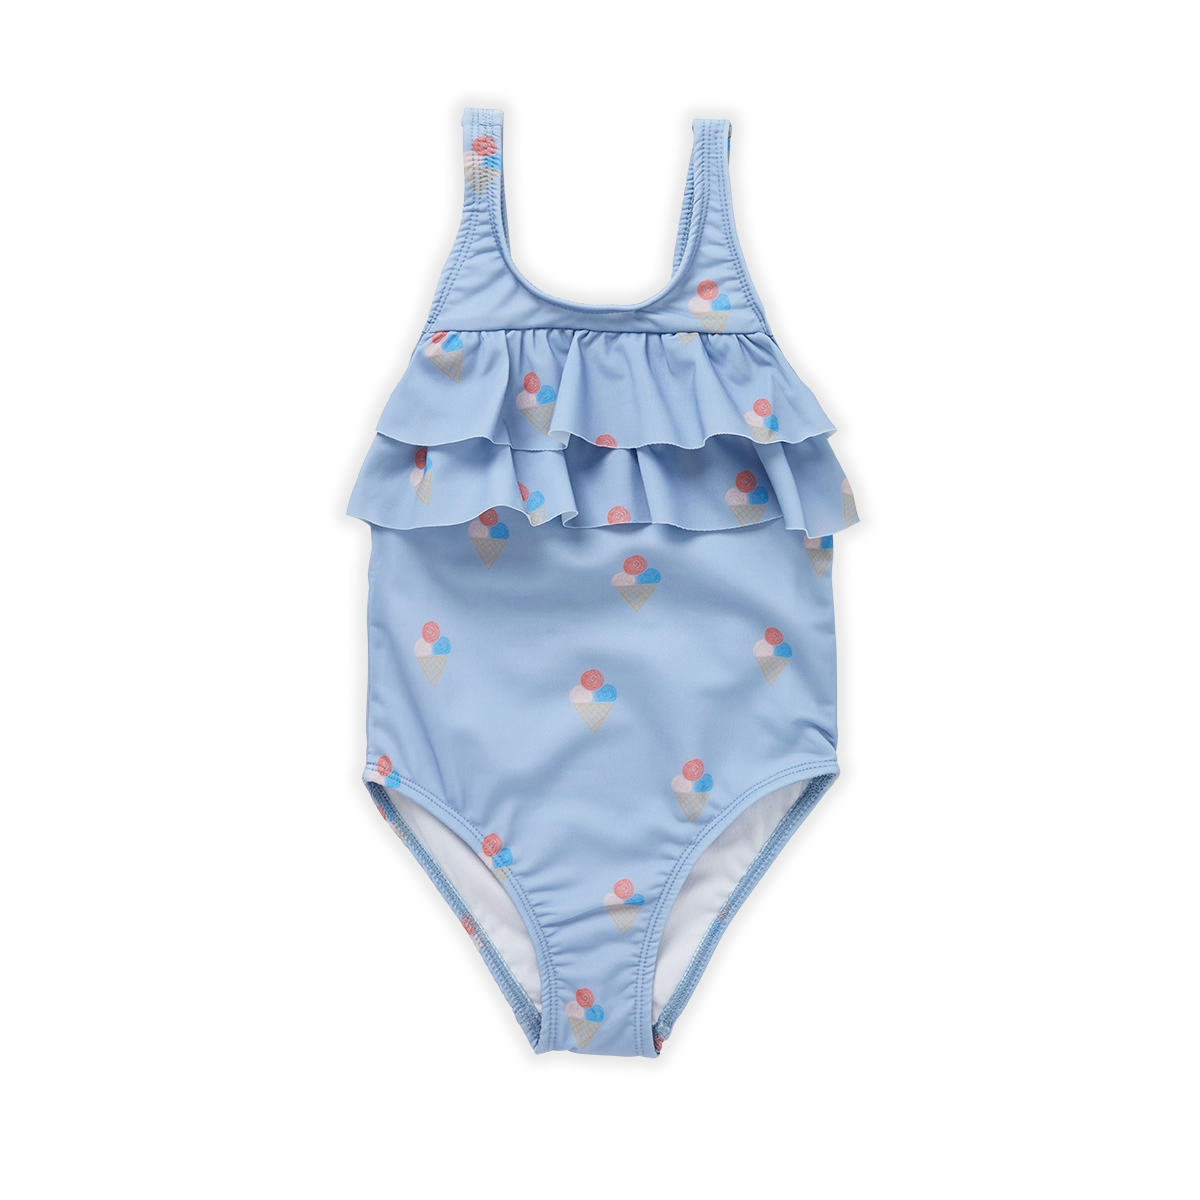 SPROET & SPROUT LIGHT BLUE ICE CREAM PRINT RUFFLE SWIMSUIT